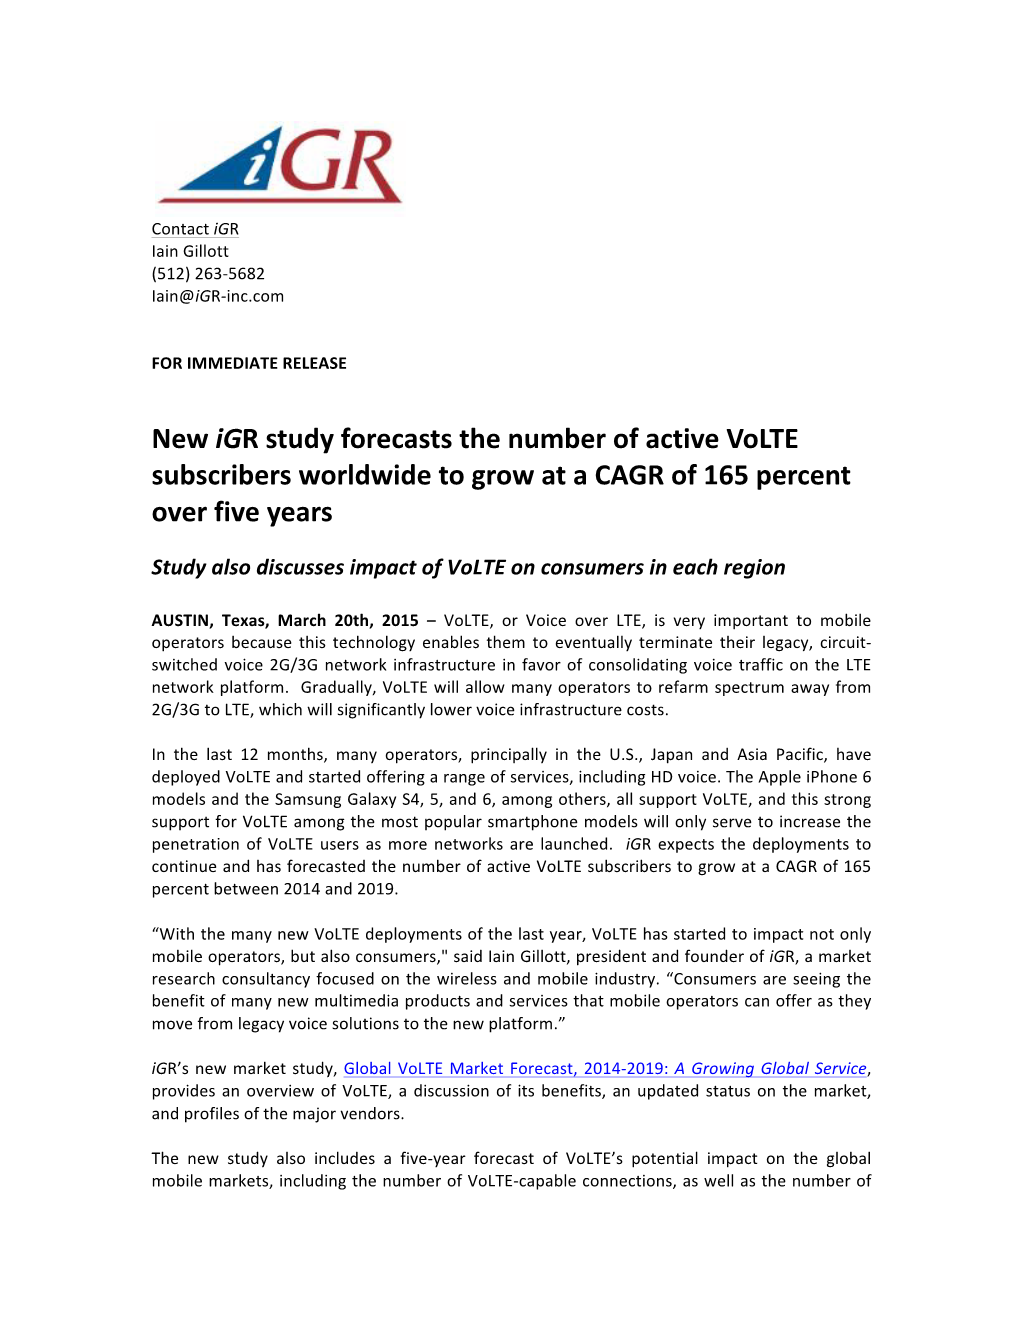 New Igr Study Forecasts the Number of Active Volte Subscribers Worldwide to Grow at a CAGR of 165 Percent Over Five Years